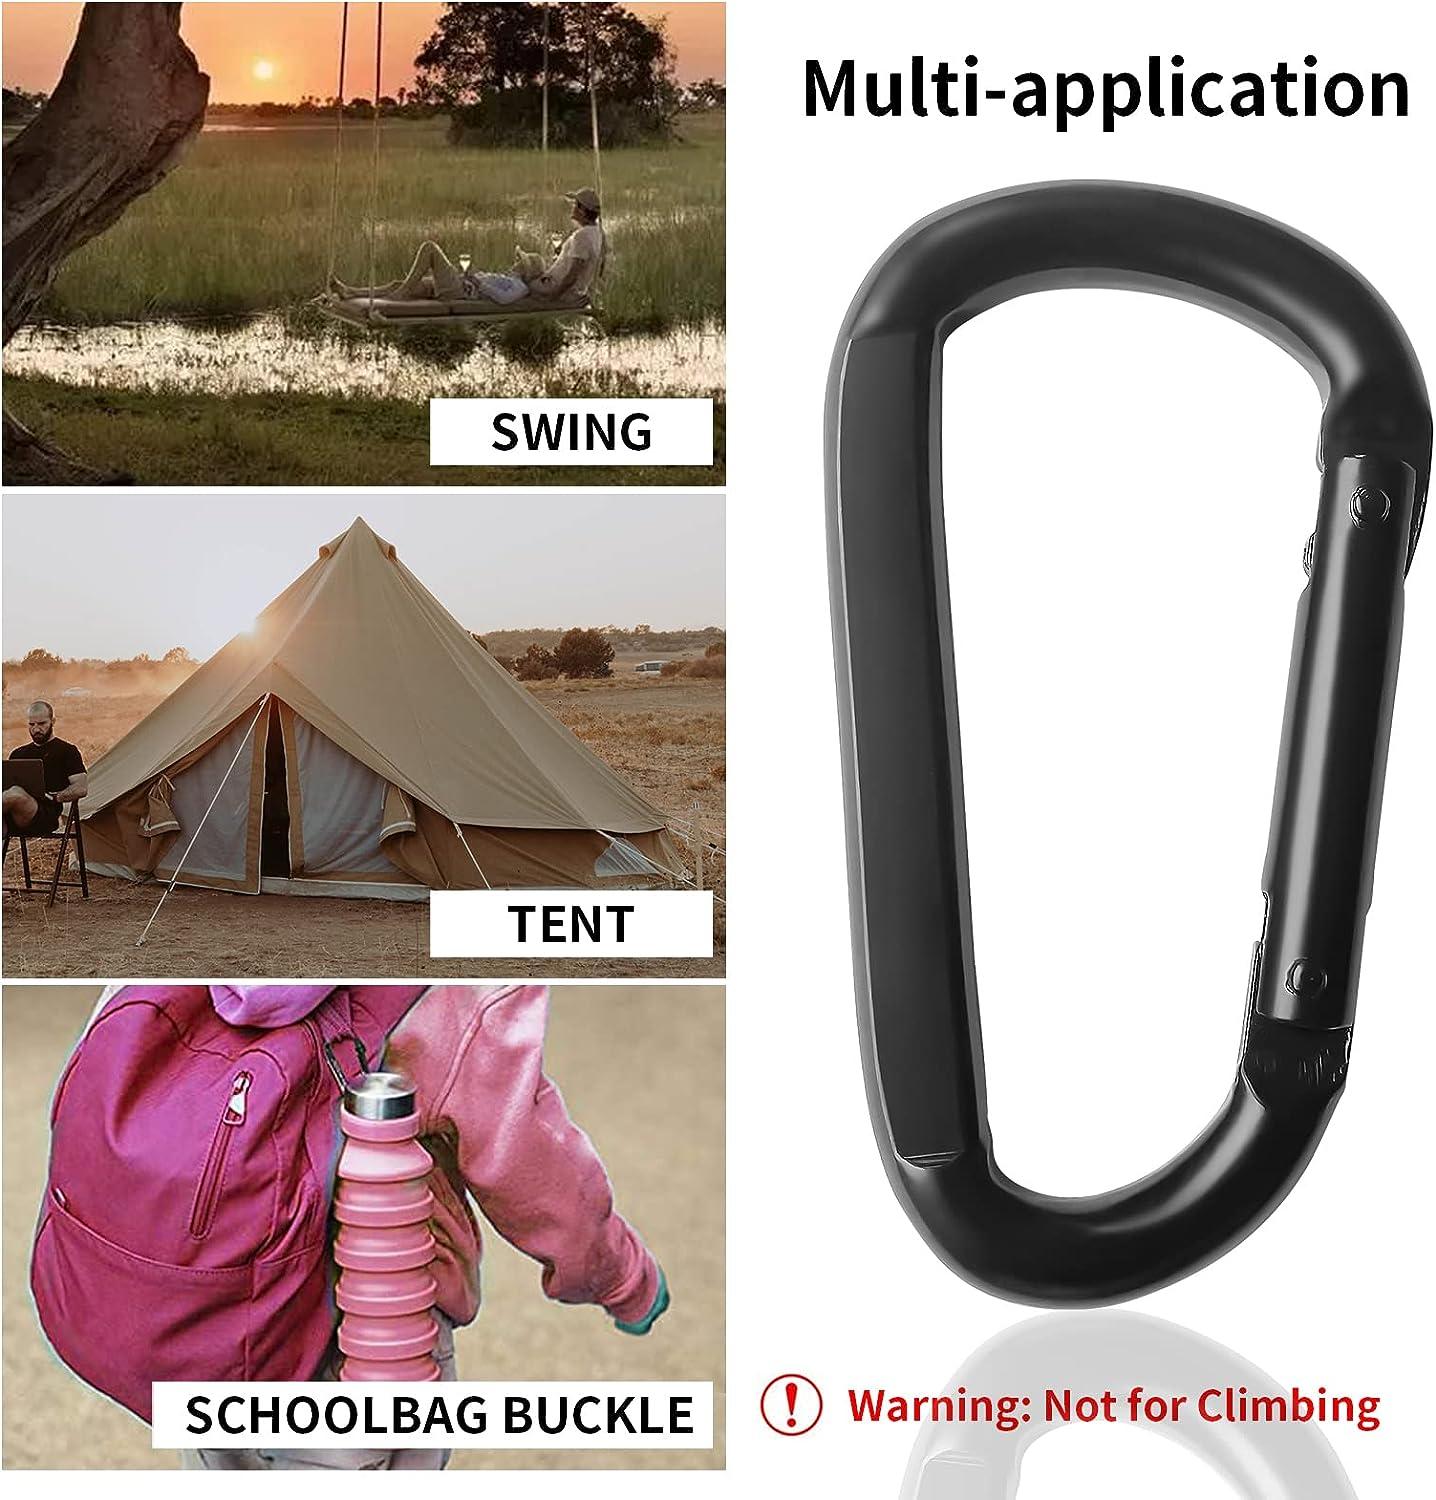 Keychain Carabiner Clip Small D-Ring Lightweight Flat Carabiners